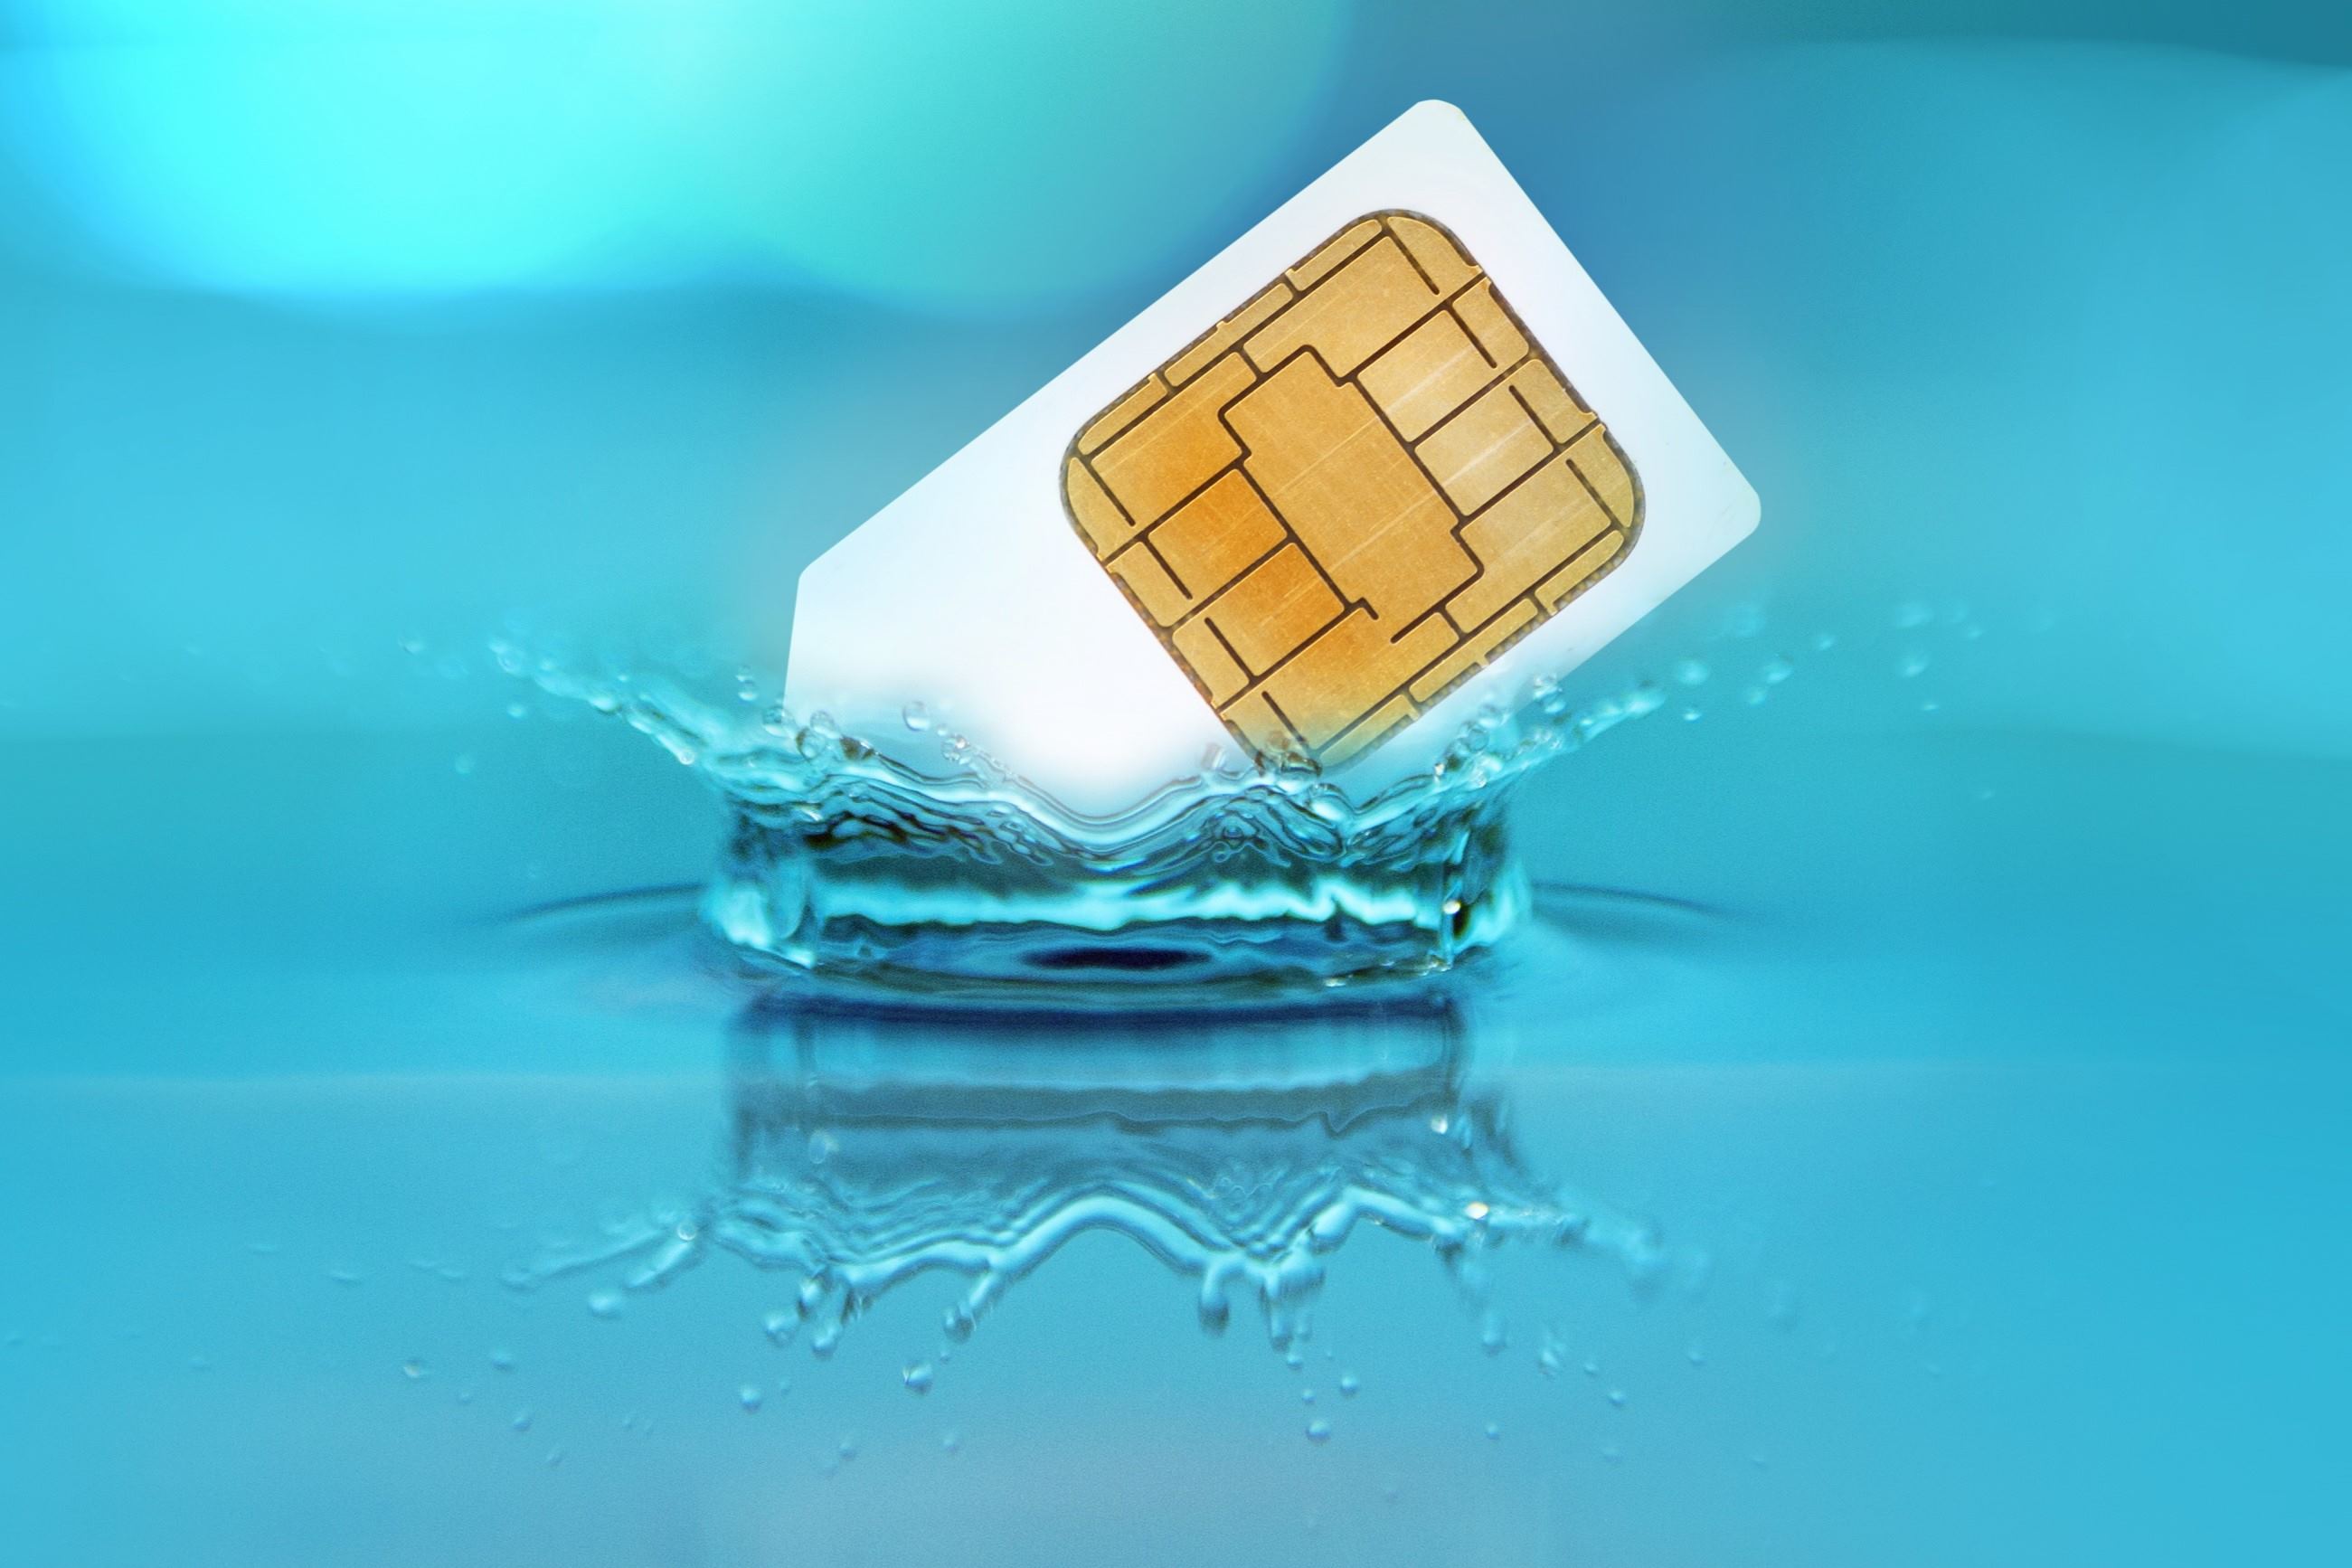 whats-stored-on-the-sim-card-important-data